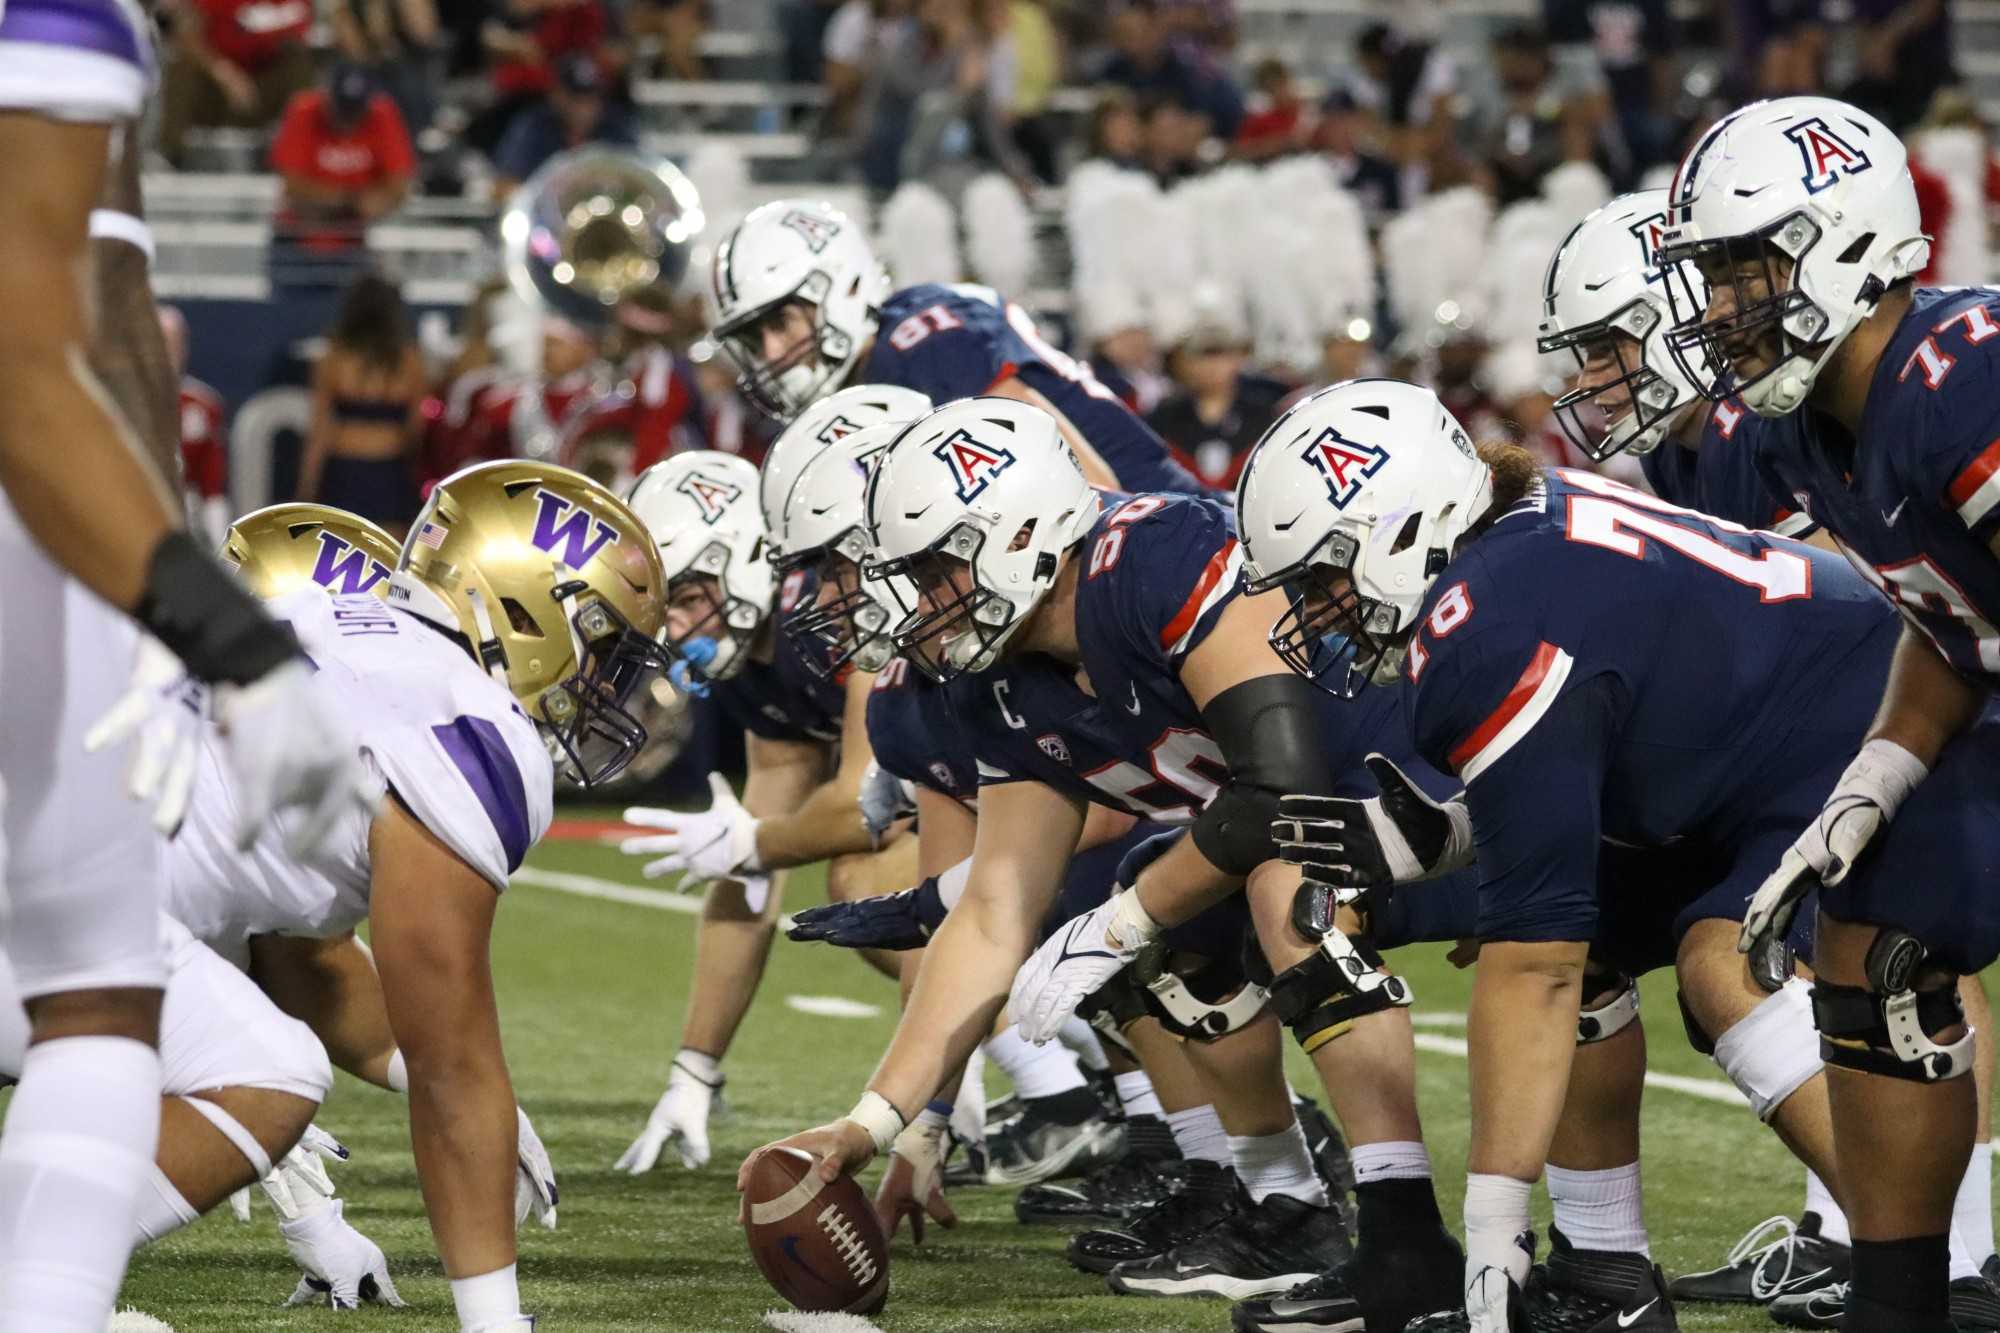 The University of Arizona Football team lines up on offense ready to start a drive against the University of Washington defense on Oct. 22 at Arizona Stadium. The Wildcats went into halftime up 13-0.